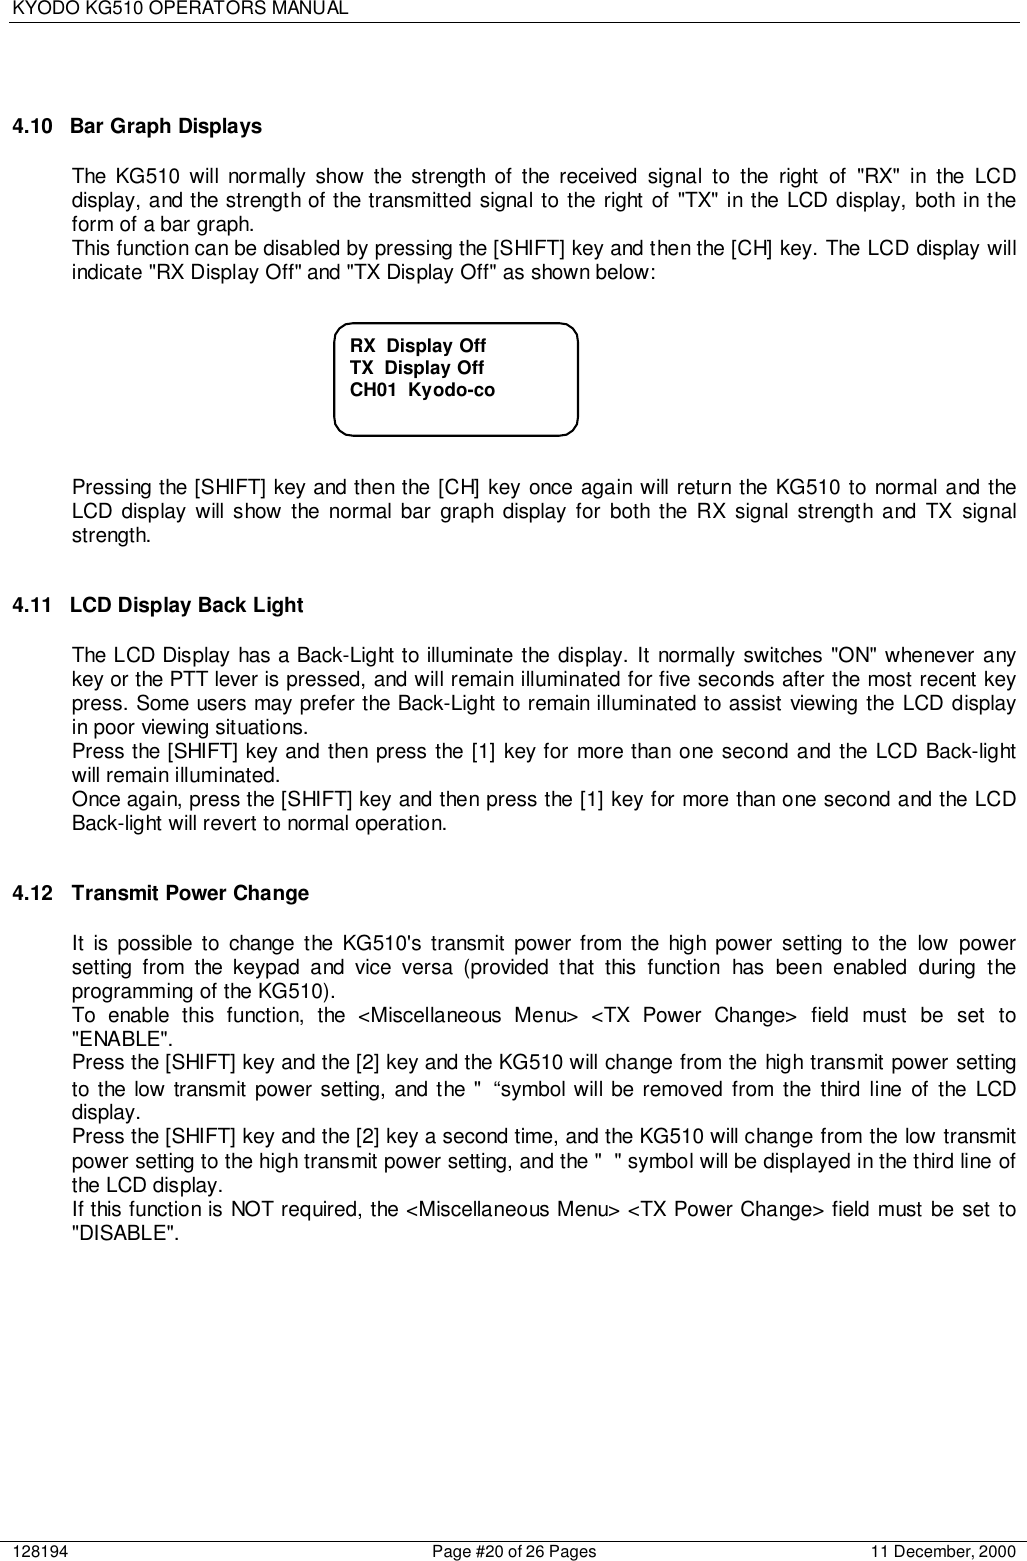 KYODO KG510 OPERATORS MANUAL128194 Page #20 of 26 Pages 11 December, 20004.10  Bar Graph DisplaysThe KG510 will normally show the strength of the received signal to the right of &quot;RX&quot; in the LCDdisplay, and the strength of the transmitted signal to the right of &quot;TX&quot; in the LCD display, both in theform of a bar graph.This function can be disabled by pressing the [SHIFT] key and then the [CH] key. The LCD display willindicate &quot;RX Display Off&quot; and &quot;TX Display Off&quot; as shown below:Pressing the [SHIFT] key and then the [CH] key once again will return the KG510 to normal and theLCD display will show the normal bar graph display for both the RX signal strength and TX signalstrength.4.11  LCD Display Back LightThe LCD Display has a Back-Light to illuminate the display. It normally switches &quot;ON&quot; whenever anykey or the PTT lever is pressed, and will remain illuminated for five seconds after the most recent keypress. Some users may prefer the Back-Light to remain illuminated to assist viewing the LCD displayin poor viewing situations.Press the [SHIFT] key and then press the [1] key for more than one second and the LCD Back-lightwill remain illuminated.Once again, press the [SHIFT] key and then press the [1] key for more than one second and the LCDBack-light will revert to normal operation.4.12 Transmit Power ChangeIt is possible to change the KG510&apos;s transmit power from the high power setting to the low powersetting from the keypad and vice versa (provided that this function has been enabled during theprogramming of the KG510).To enable this function, the &lt;Miscellaneous Menu&gt; &lt;TX Power Change&gt; field must be set to&quot;ENABLE&quot;.Press the [SHIFT] key and the [2] key and the KG510 will change from the high transmit power settingto the low transmit power setting, and the &quot; “symbol will be removed from the third line of the LCDdisplay.Press the [SHIFT] key and the [2] key a second time, and the KG510 will change from the low transmitpower setting to the high transmit power setting, and the &quot; &quot; symbol will be displayed in the third line ofthe LCD display.If this function is NOT required, the &lt;Miscellaneous Menu&gt; &lt;TX Power Change&gt; field must be set to&quot;DISABLE&quot;.RX  Display OffTX  Display OffCH01  Kyodo-co